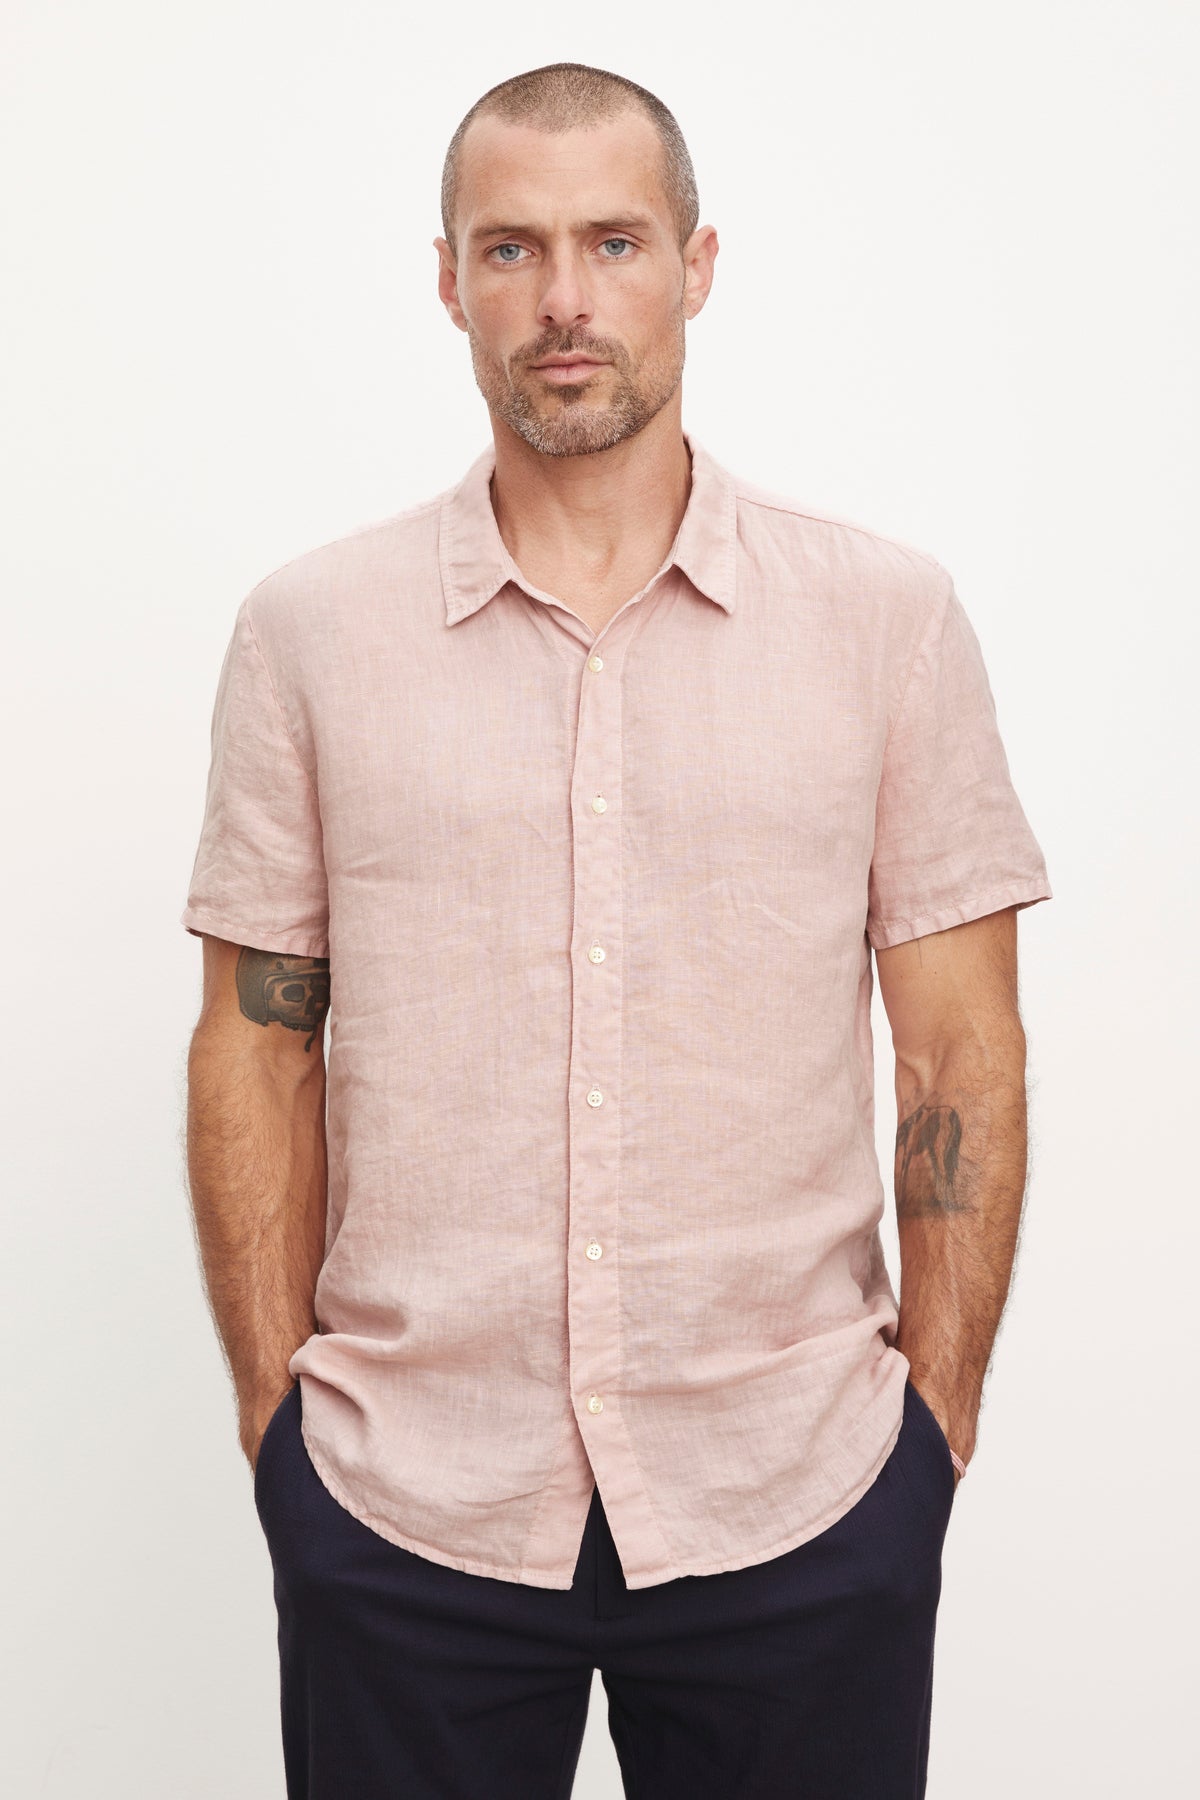 A man with a beard stands wearing a Velvet by Graham & Spencer MACKIE LINEN BUTTON-UP SHIRT in pink and navy pants, looking directly at the camera. He has tattoos visible on his arms.-36753539662017